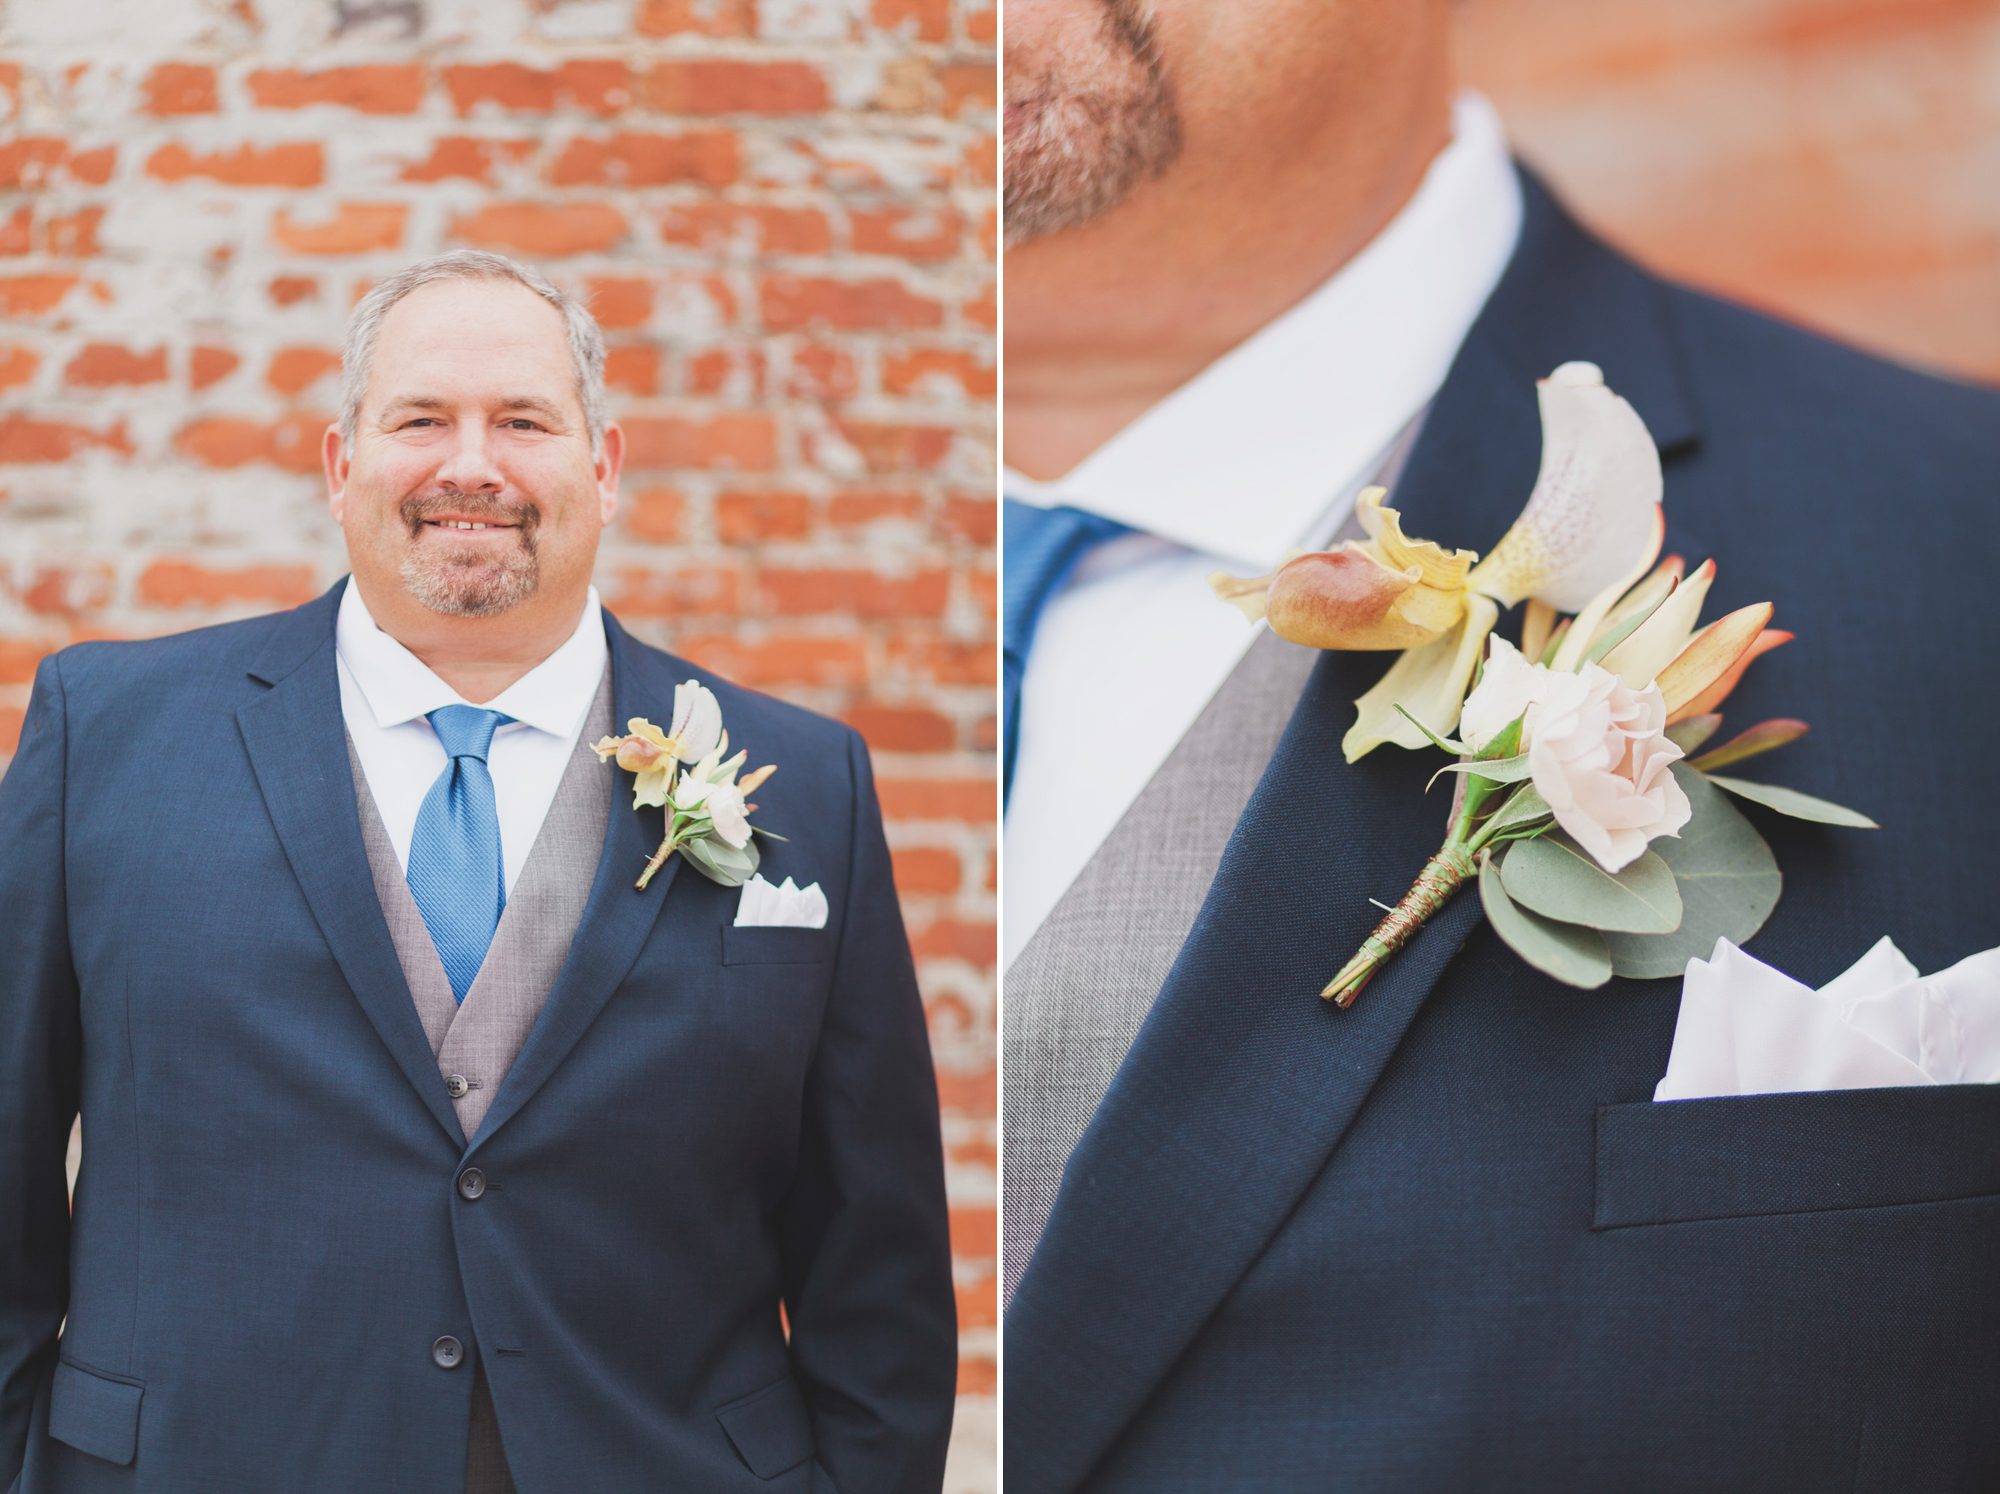 Groom and boutonniere portraits before wedding ceremony  at Houston Station, Nashville TN. Photos by Krista Lee Photography.